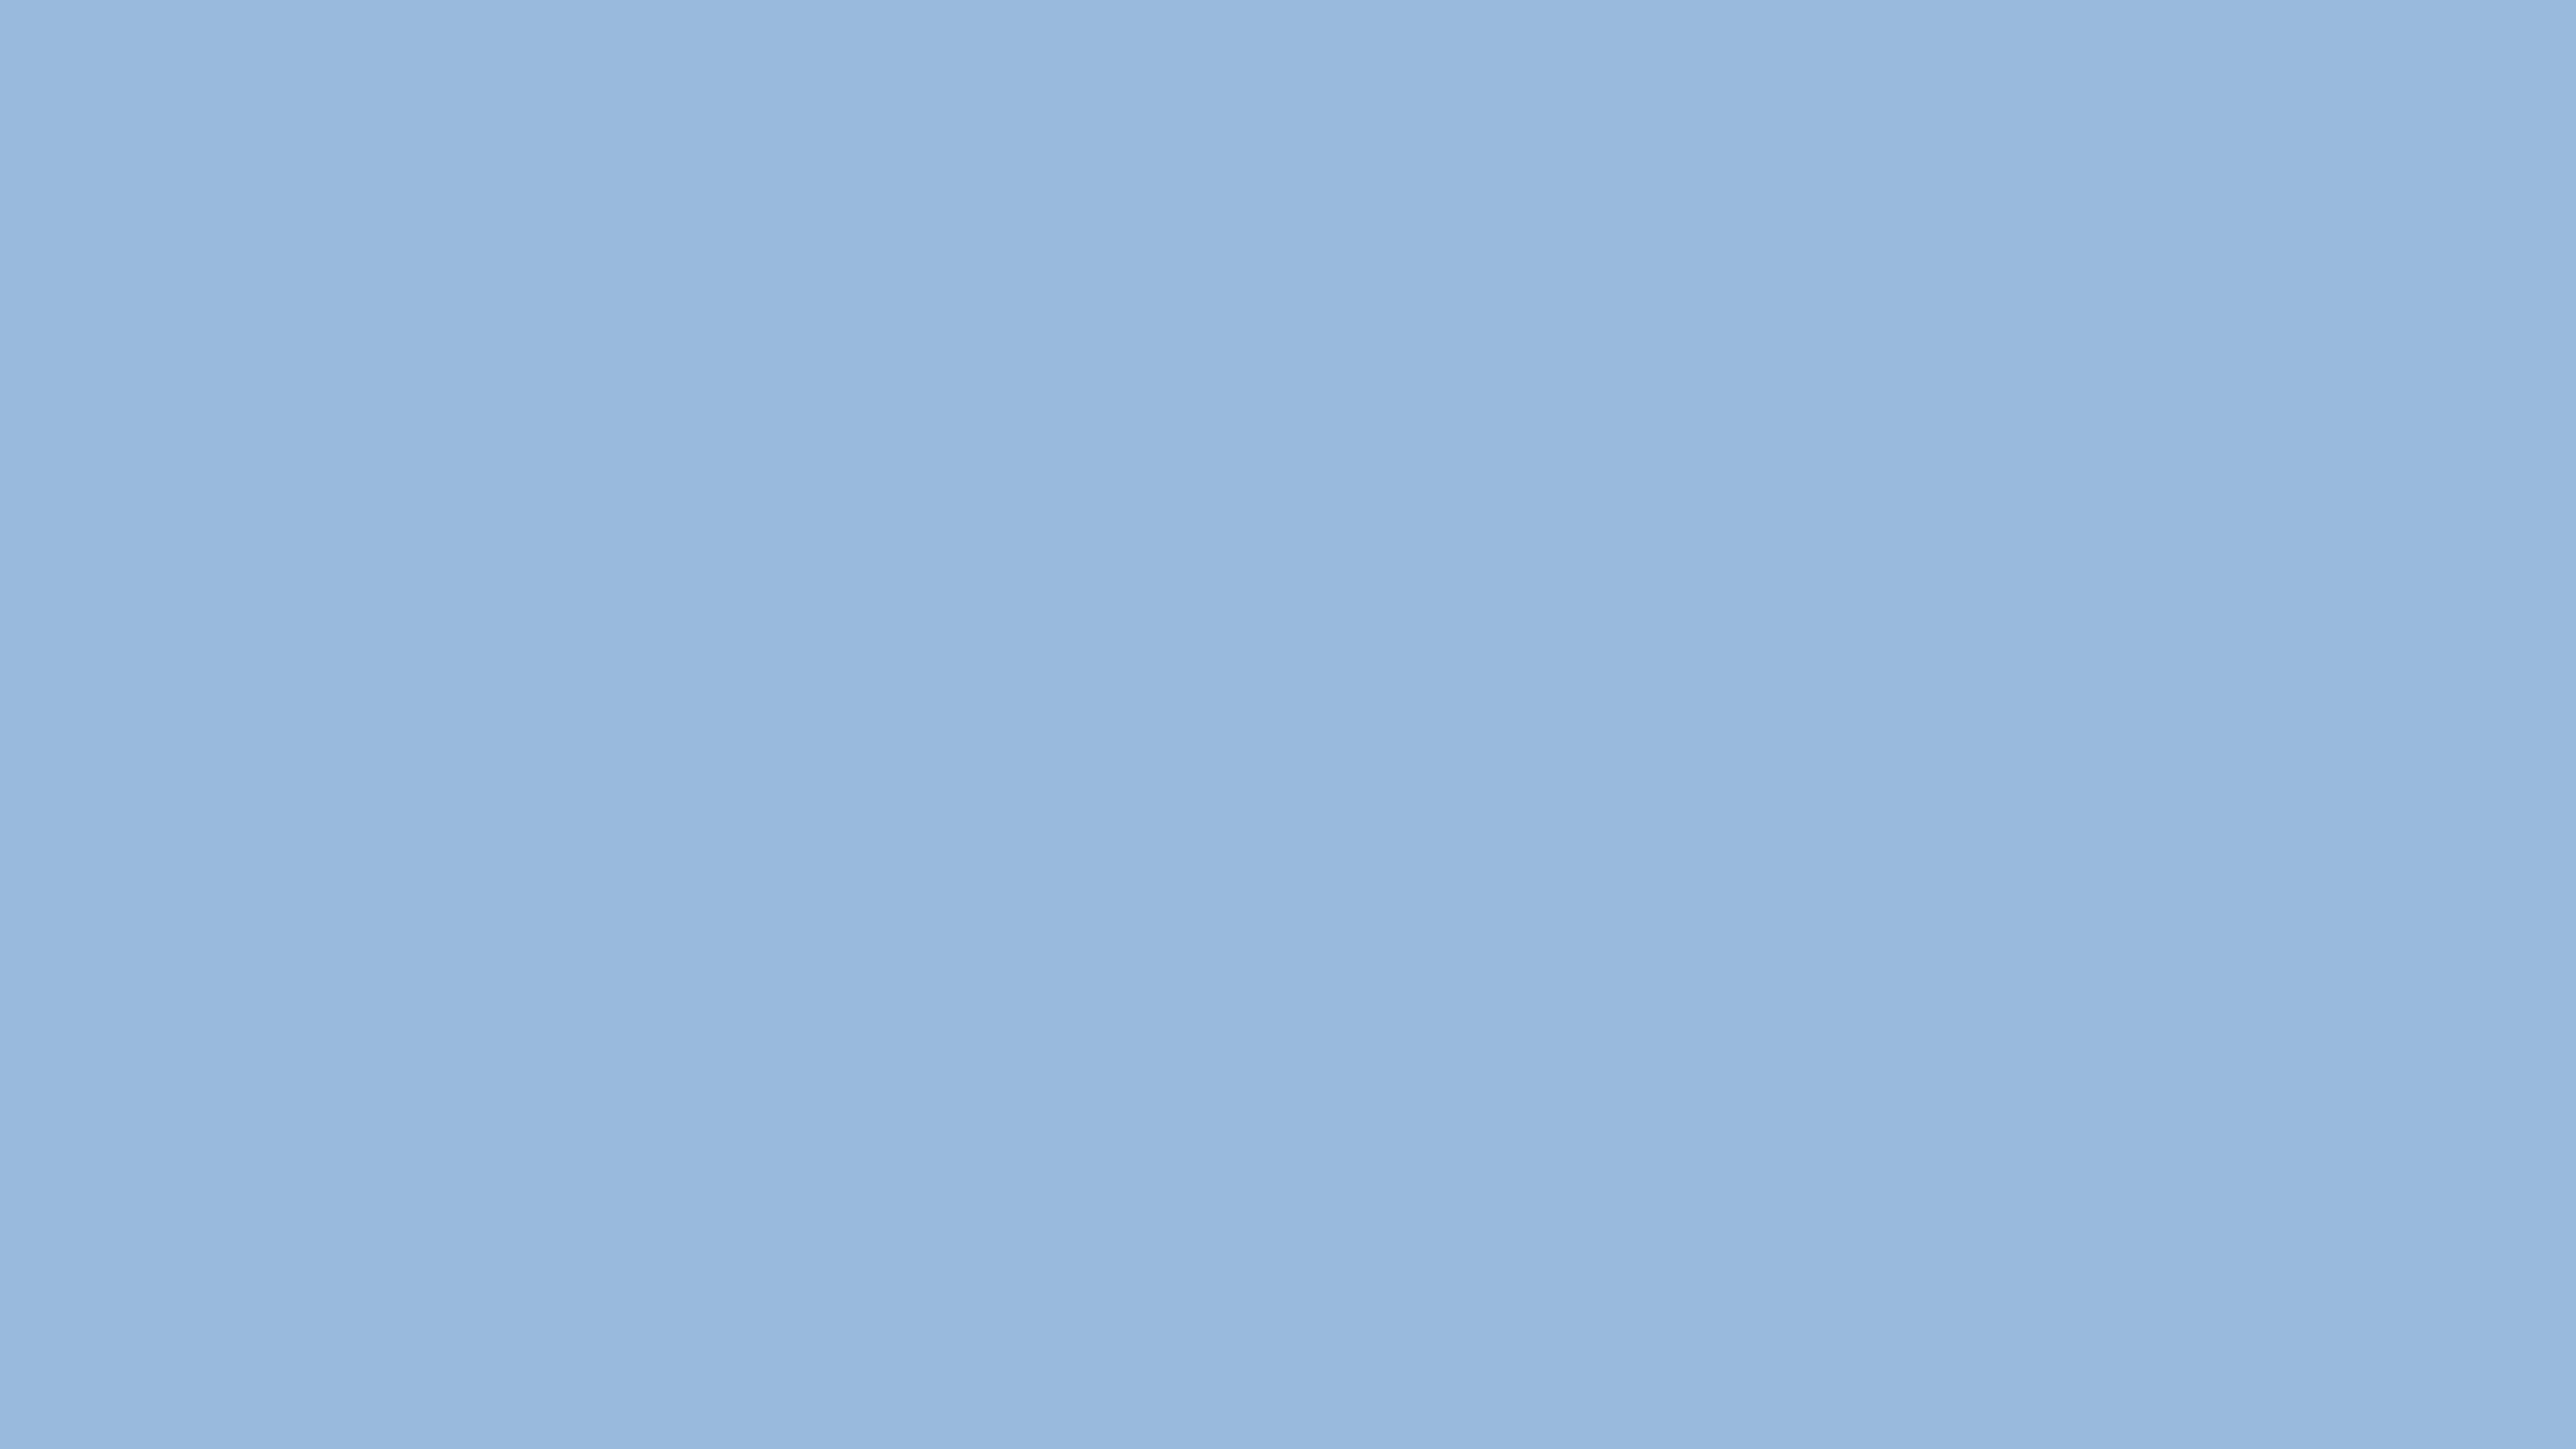 Show off your school pride with UNC blue background And support your favorite team